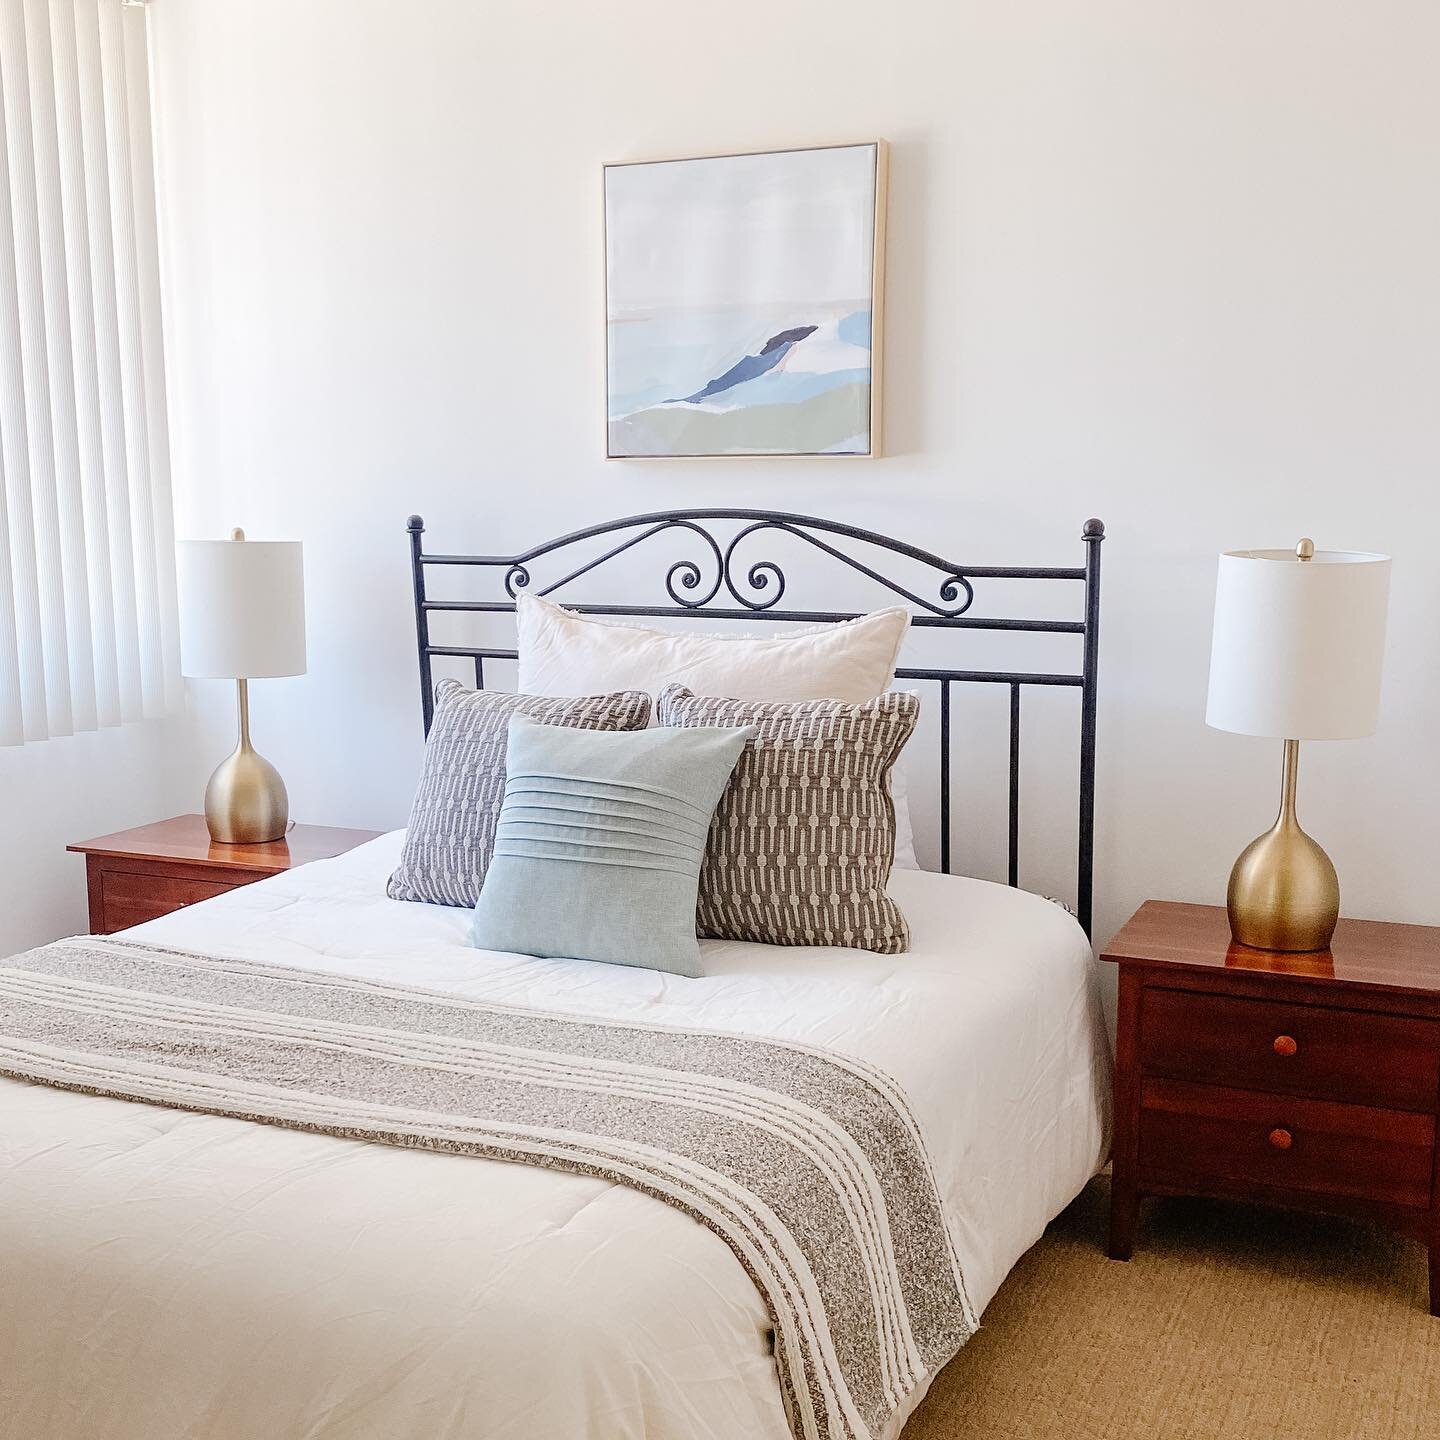 Staging tips!
Fresh paint, neutral bedding, matching lamps. Small changes make such a difference. #stagingtips #homestaging #stagingsells #stagingworks #homestagingworks